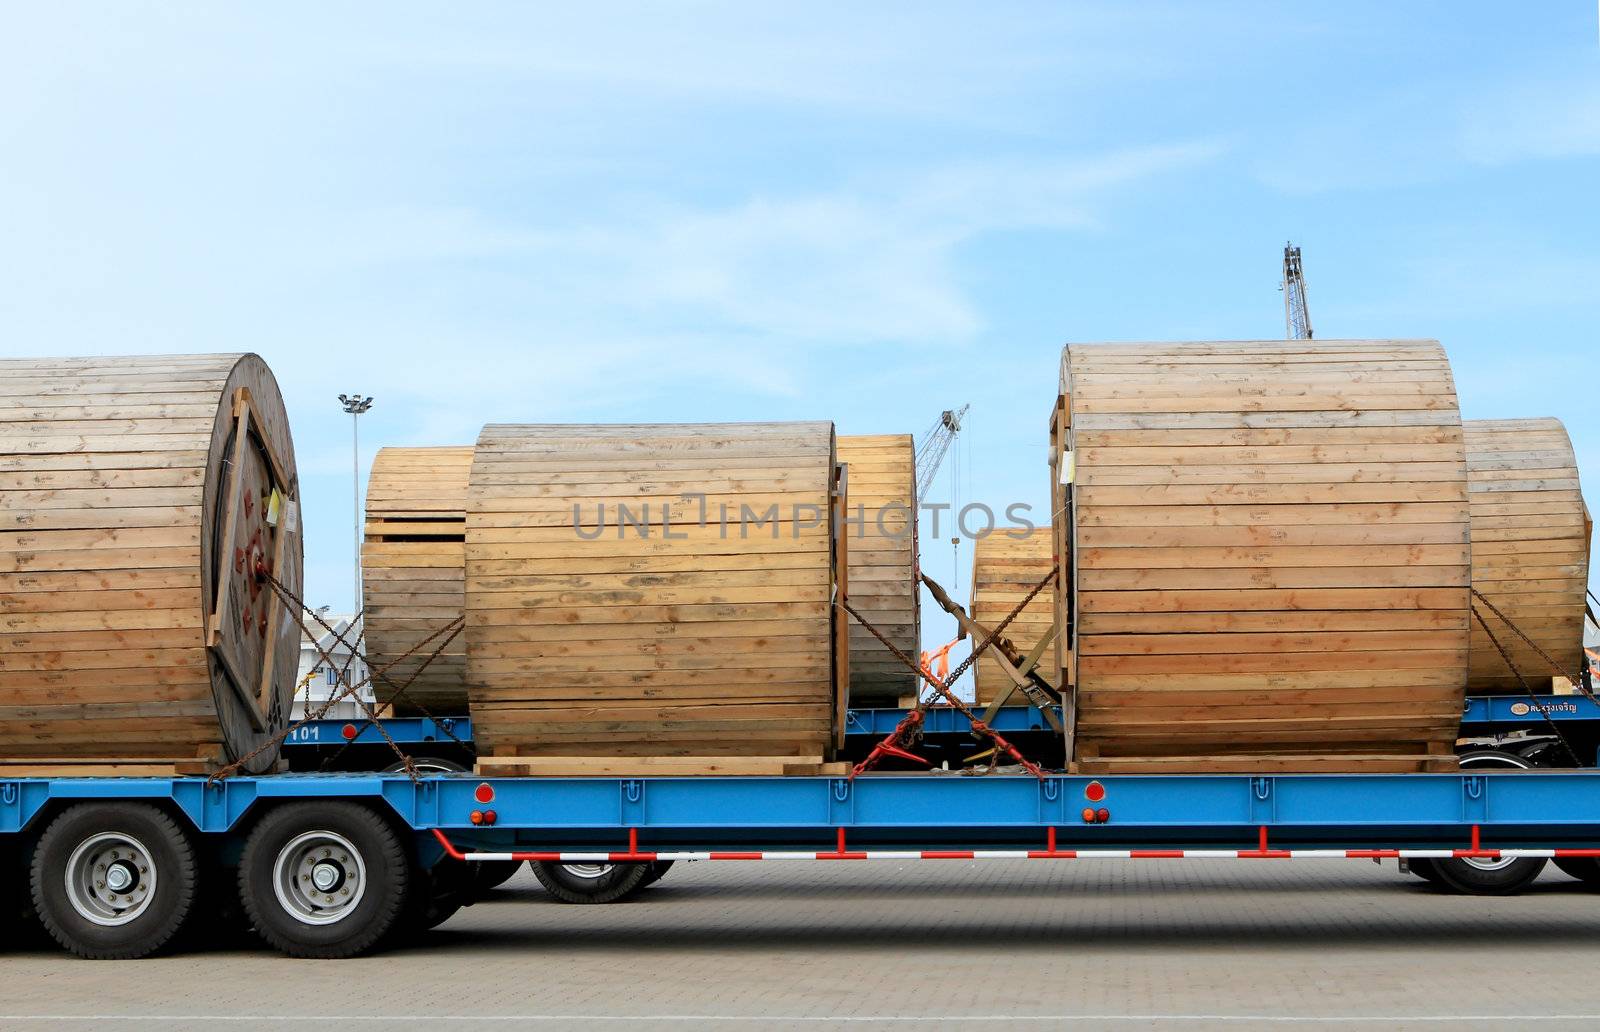 Transportation of metal products on road